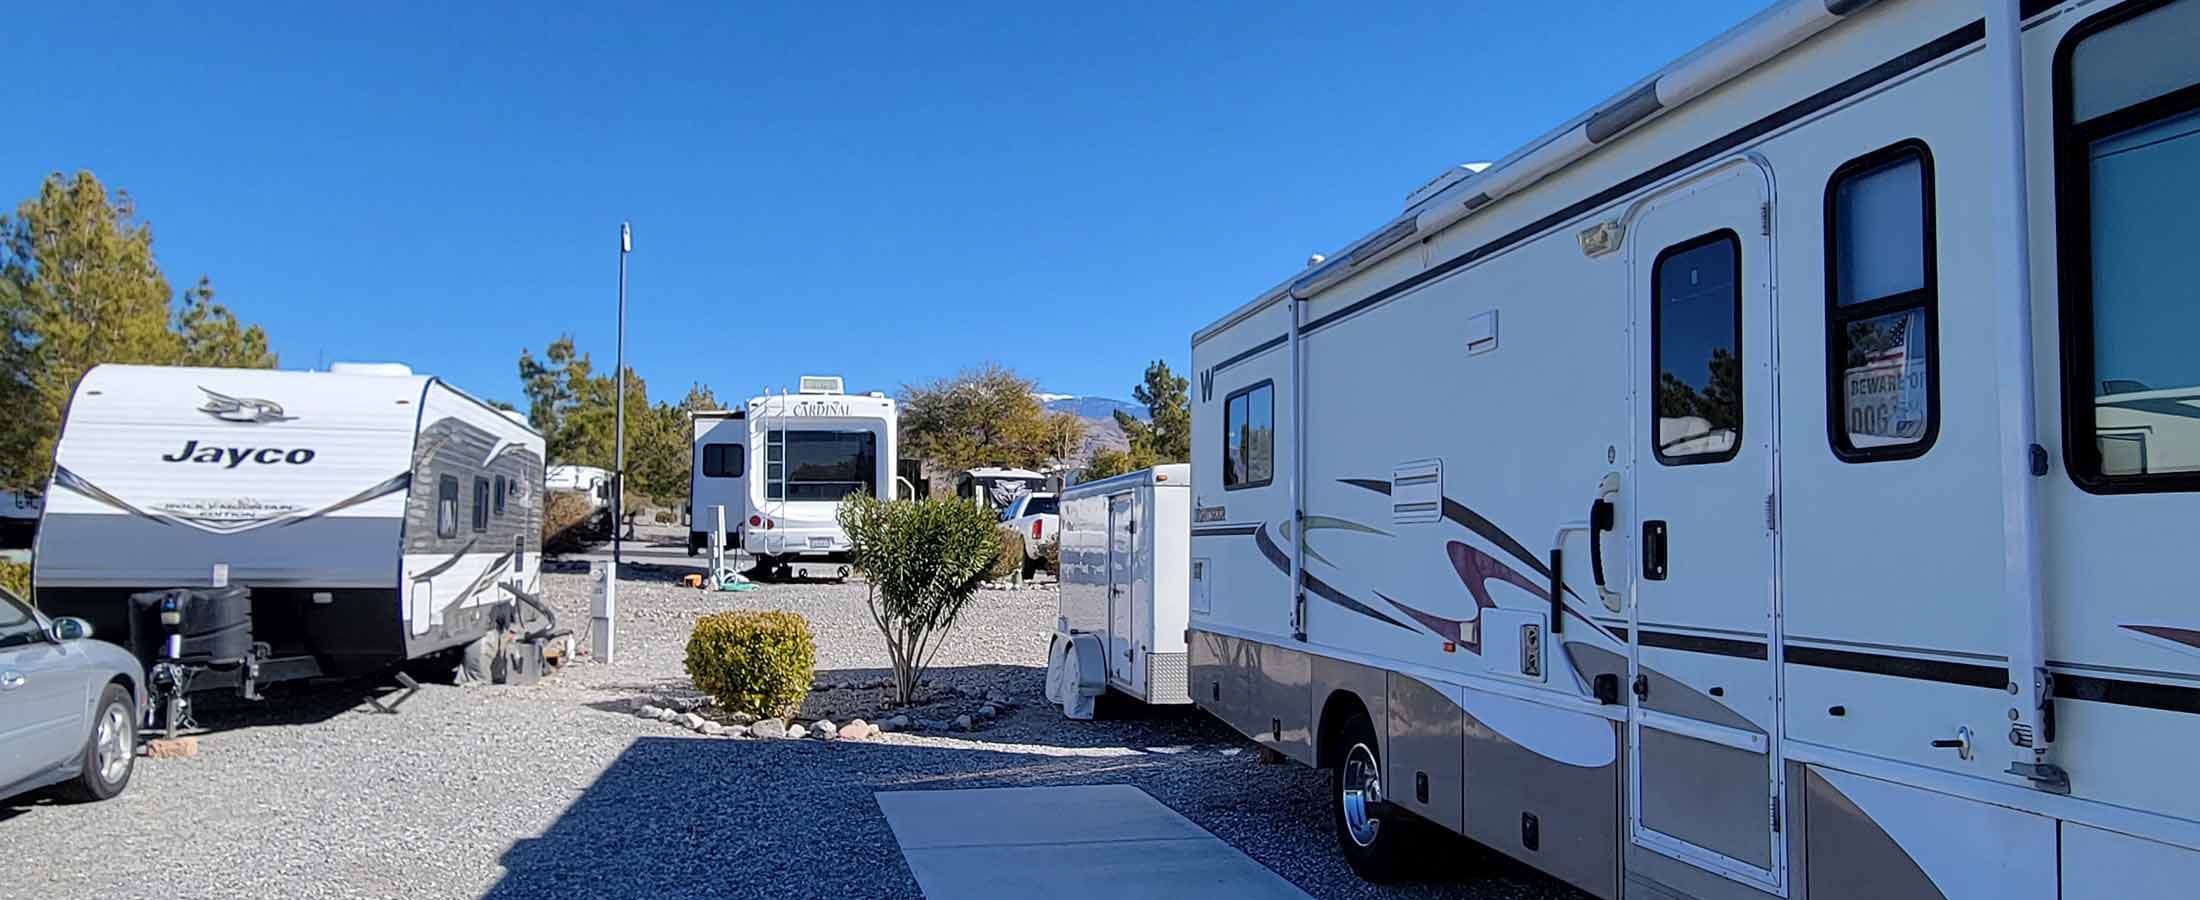 Three RVs in campground